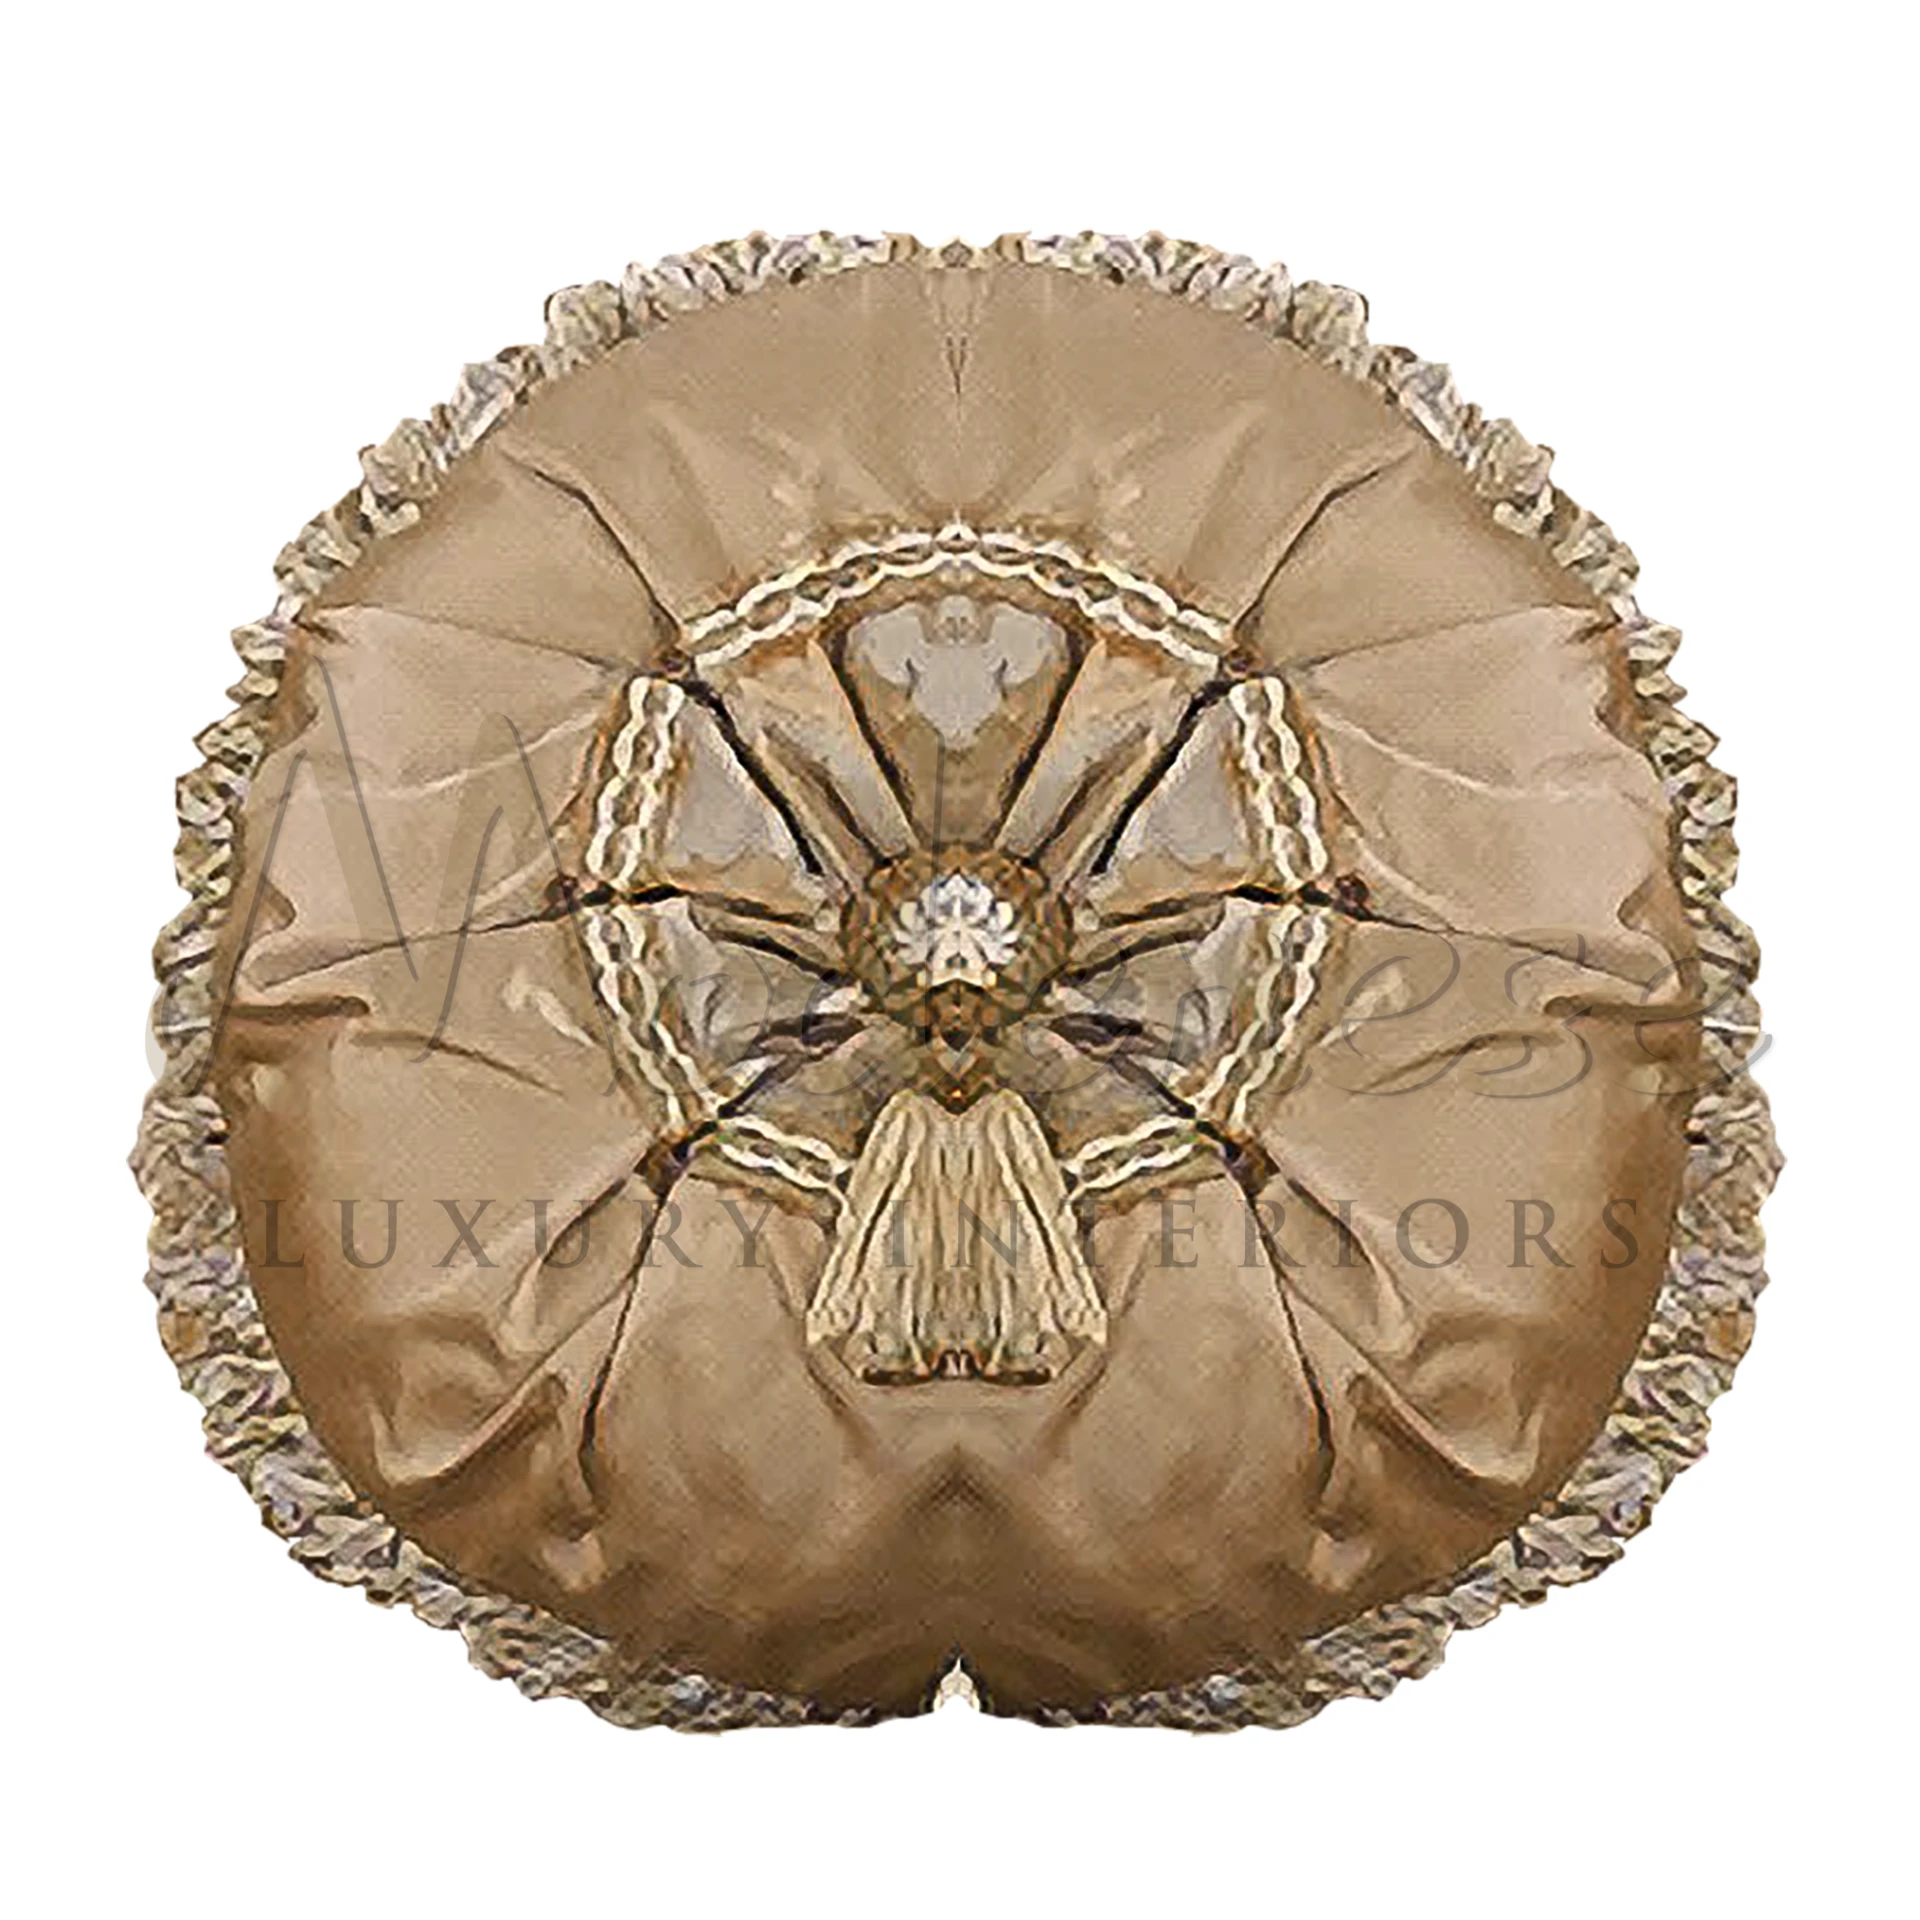 Classical Duchess Pillow with ornate design, crafted from luxury Italian textiles.